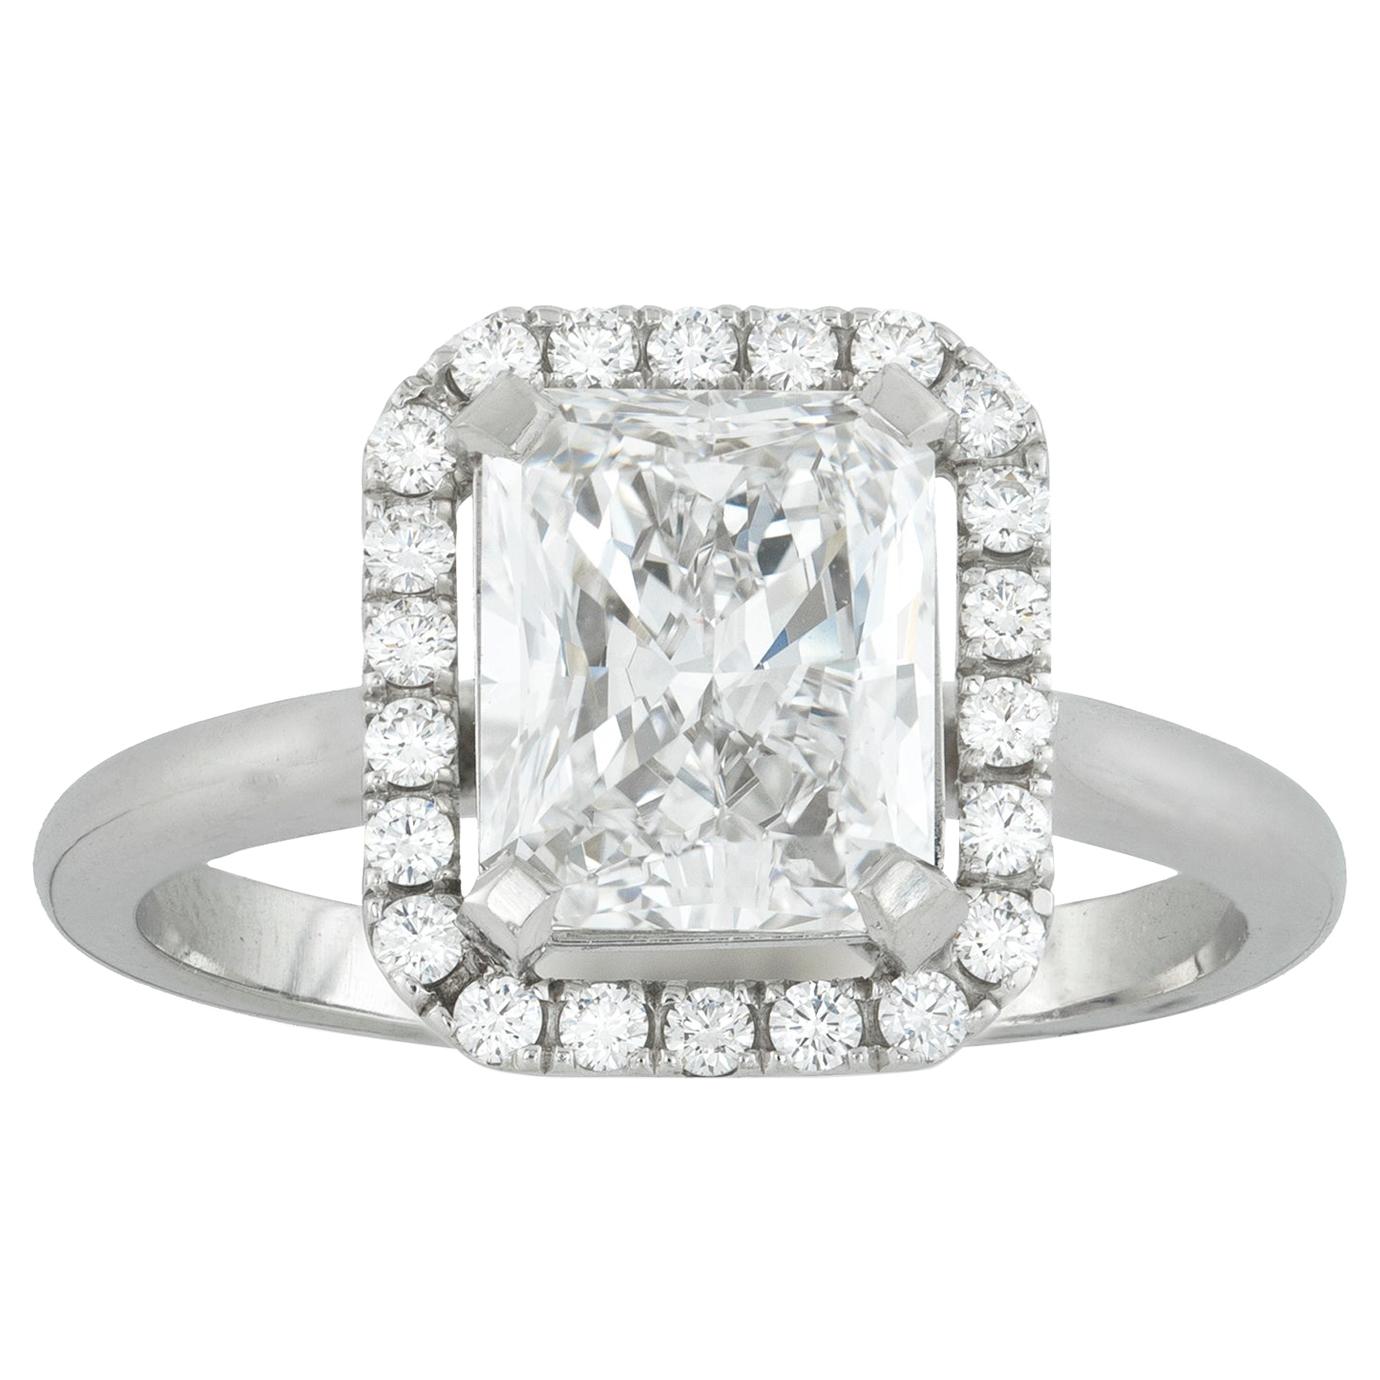 GIA Certified 1.91 carat Radiant-Cut Diamond Cluster Ring For Sale